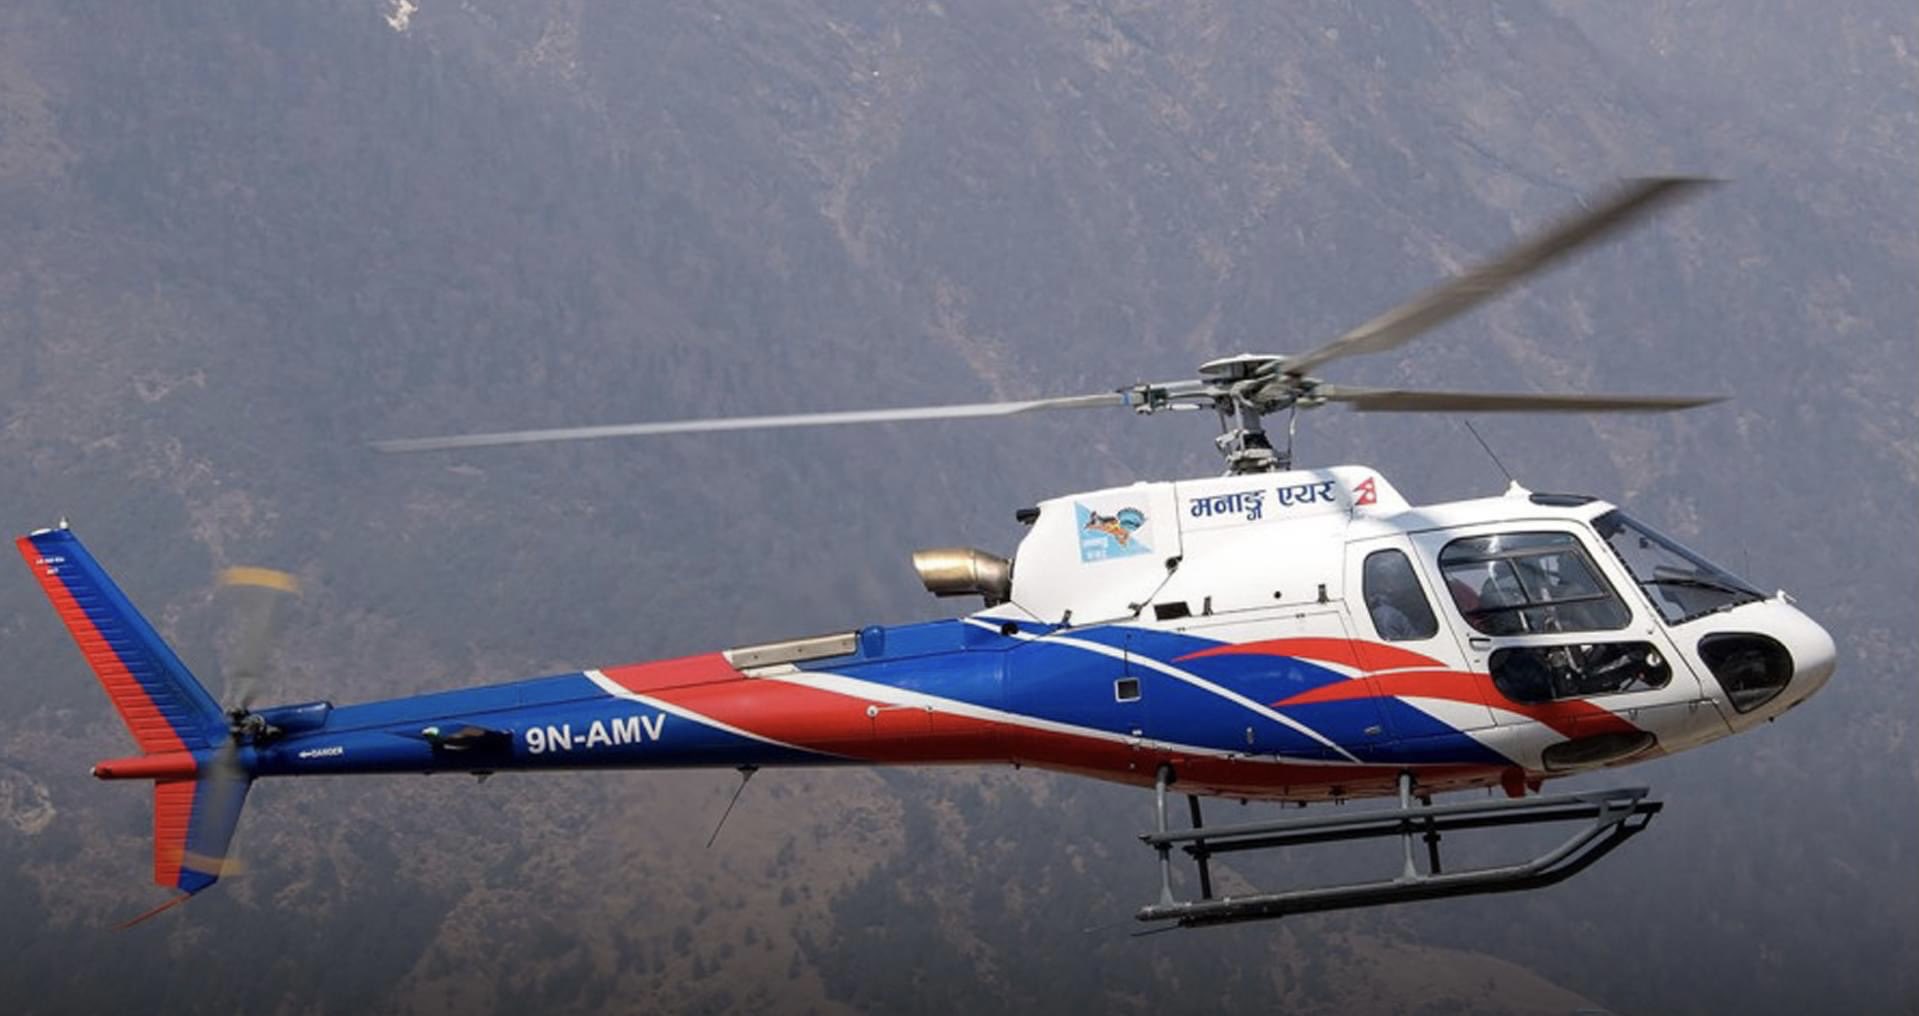 Fatal  Crash  Of  Private  Tourist  Airbus H125 Ecureuil  Helicopter  Near Mount Everest in Nepal  Included  One  Nepali  and 5  Mexicans.